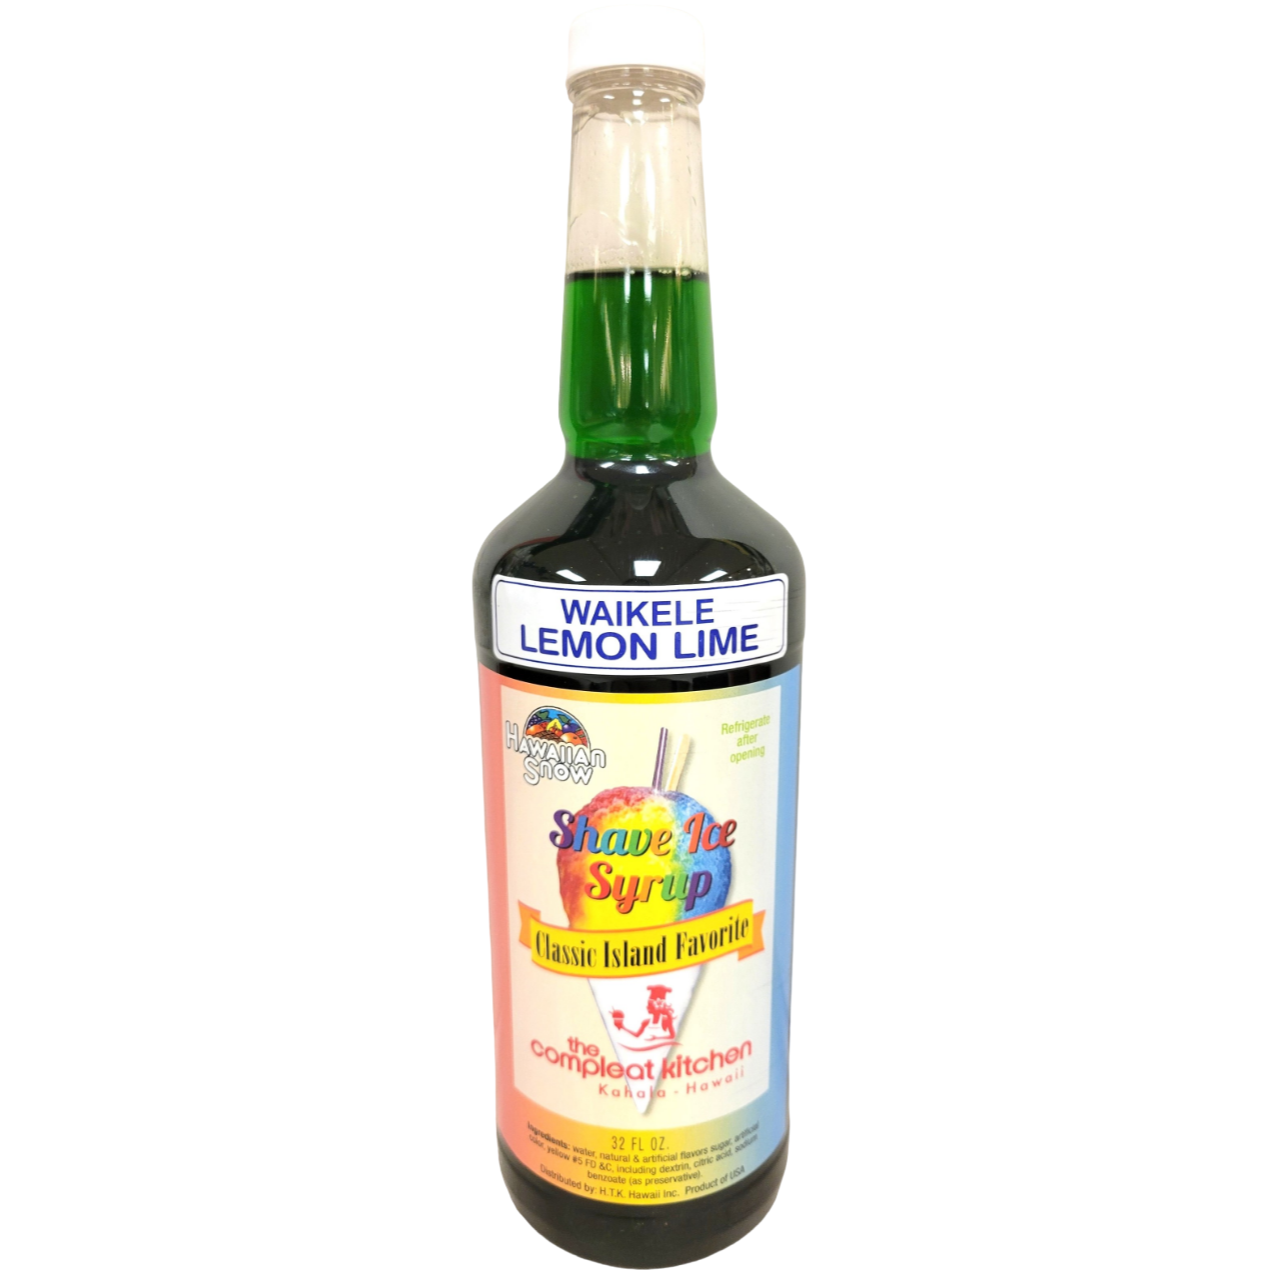 The Compleat Kitchen Shave Ice Syrup - Waikele Lemon Lime